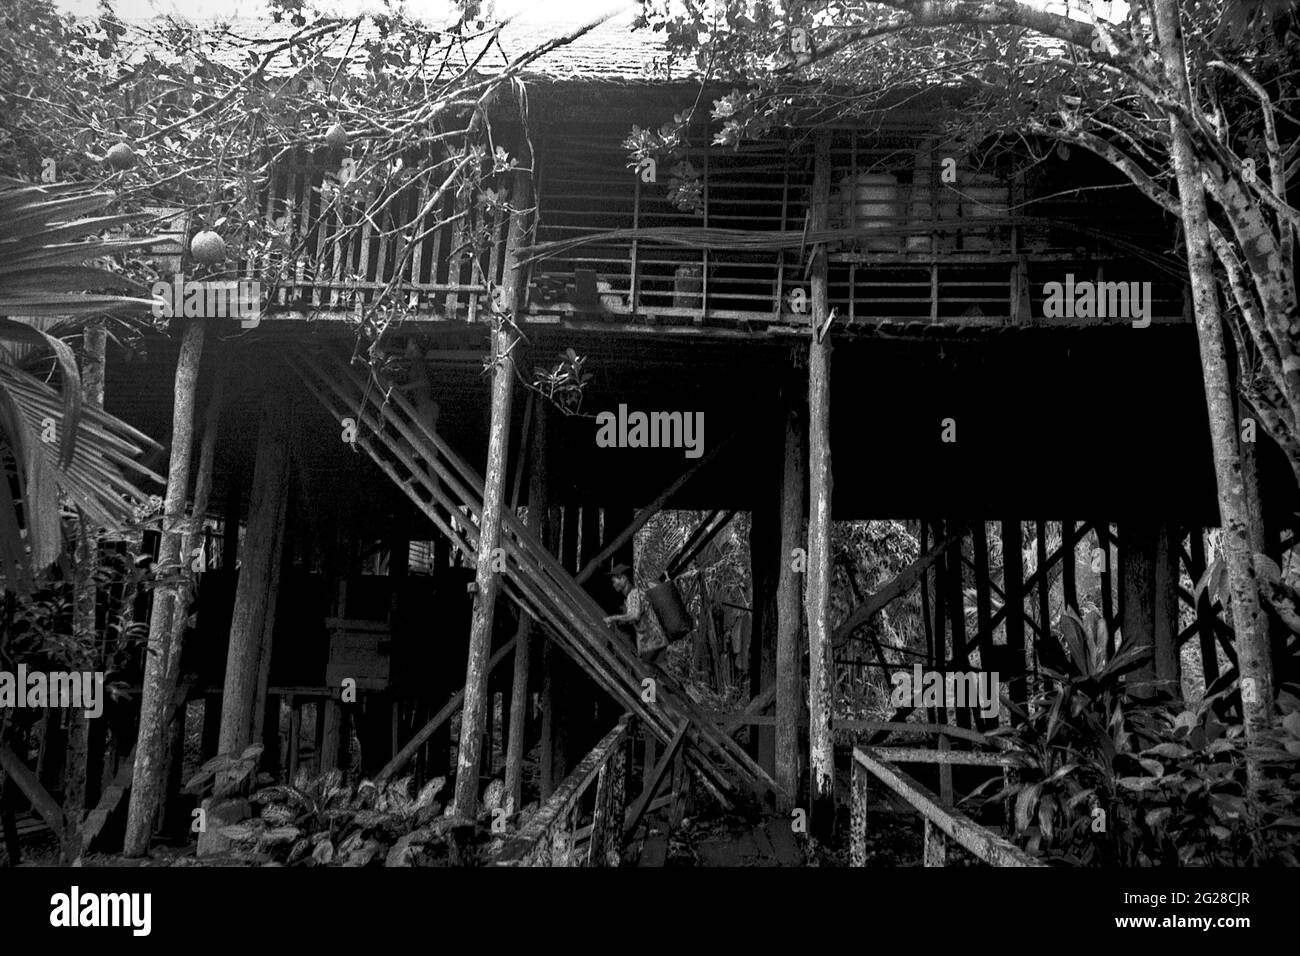 West kalimantan Black and White Stock Photos & Images - Alamy